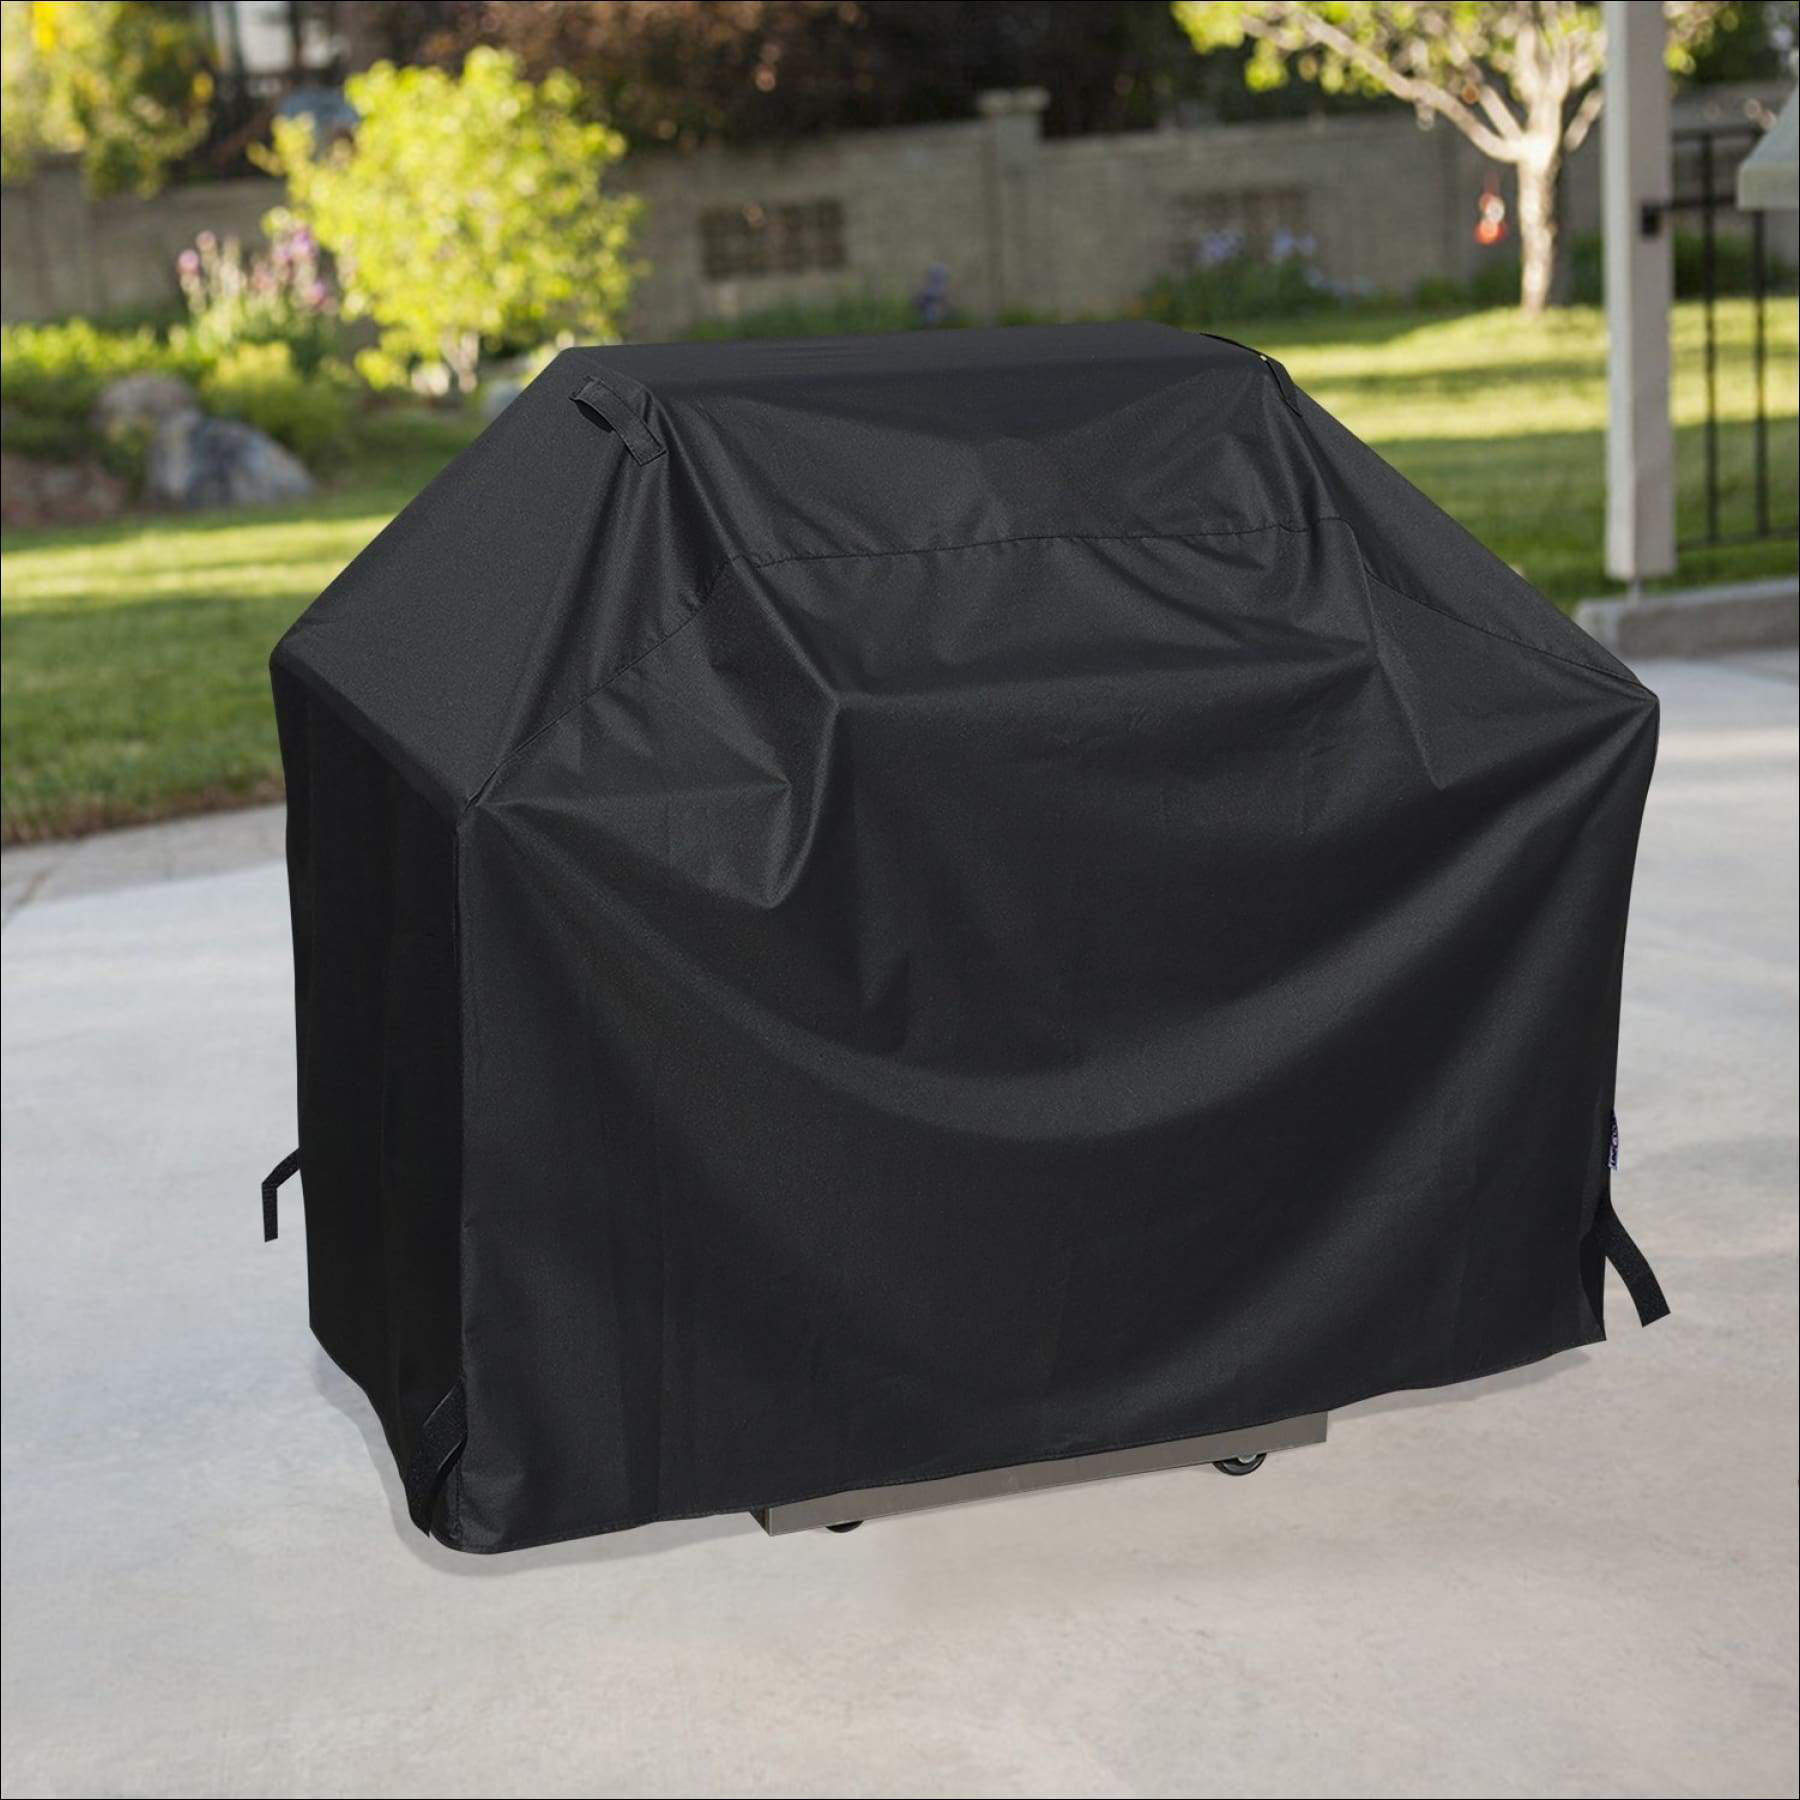 Large Round BBQ Covers Heavy Duty Rain Snow Waterproof Barbeque Protector Case 